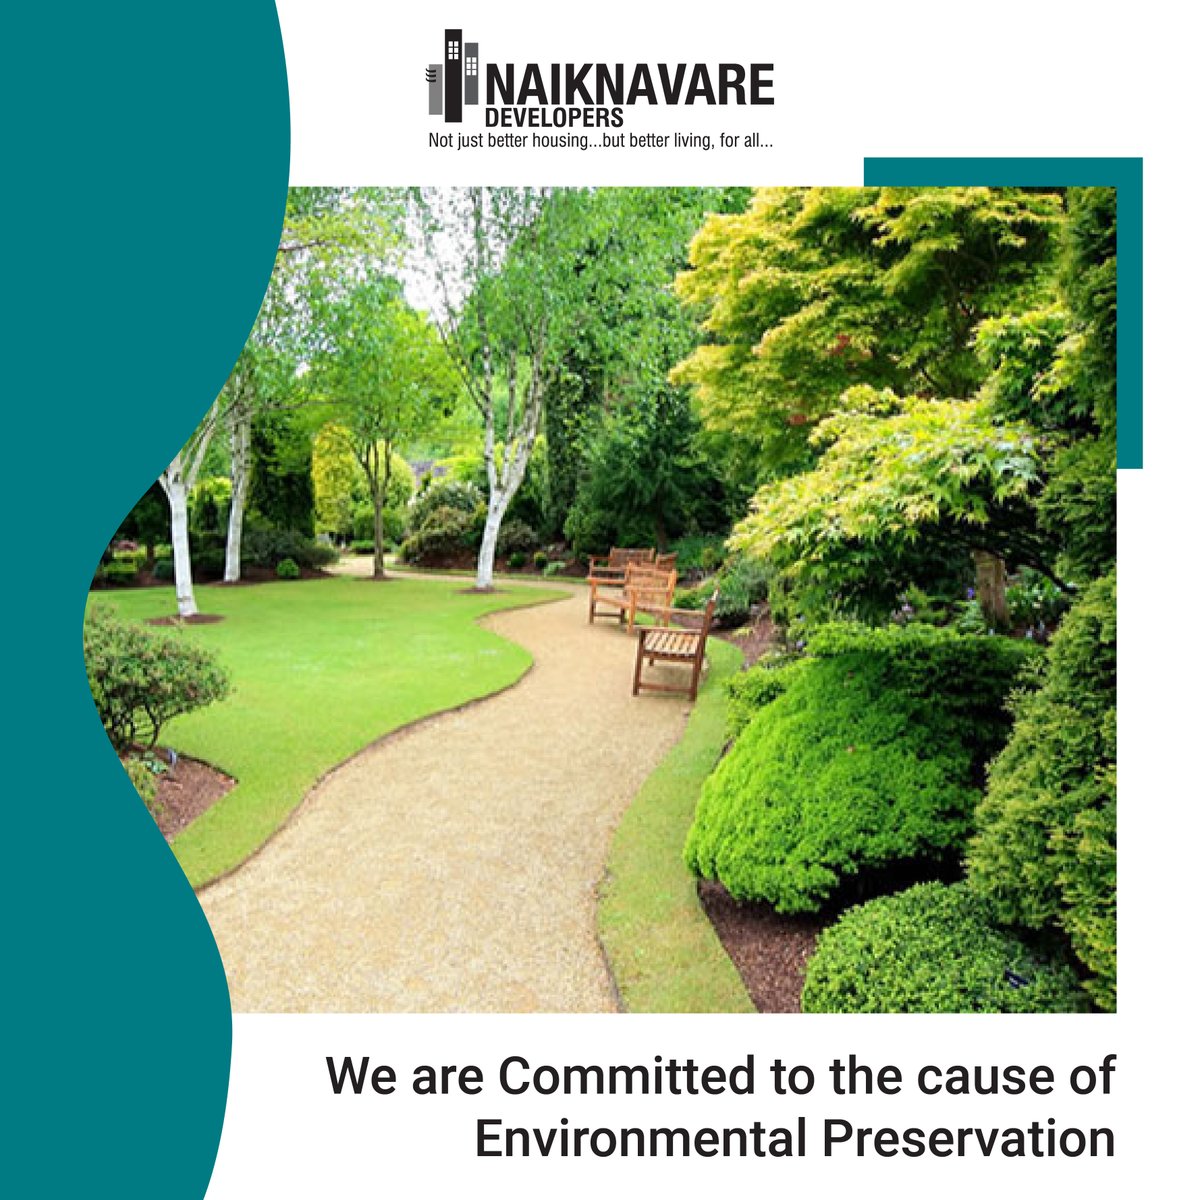 Naiknavare Developers have always been passionate about the Preservation & Beautification of the Environment. It is a cause we strive for.

#NaiknavareDevelopers #Hirwaeetrust #EnvironmentPreservation #GreenPune #GoGreen #Pune